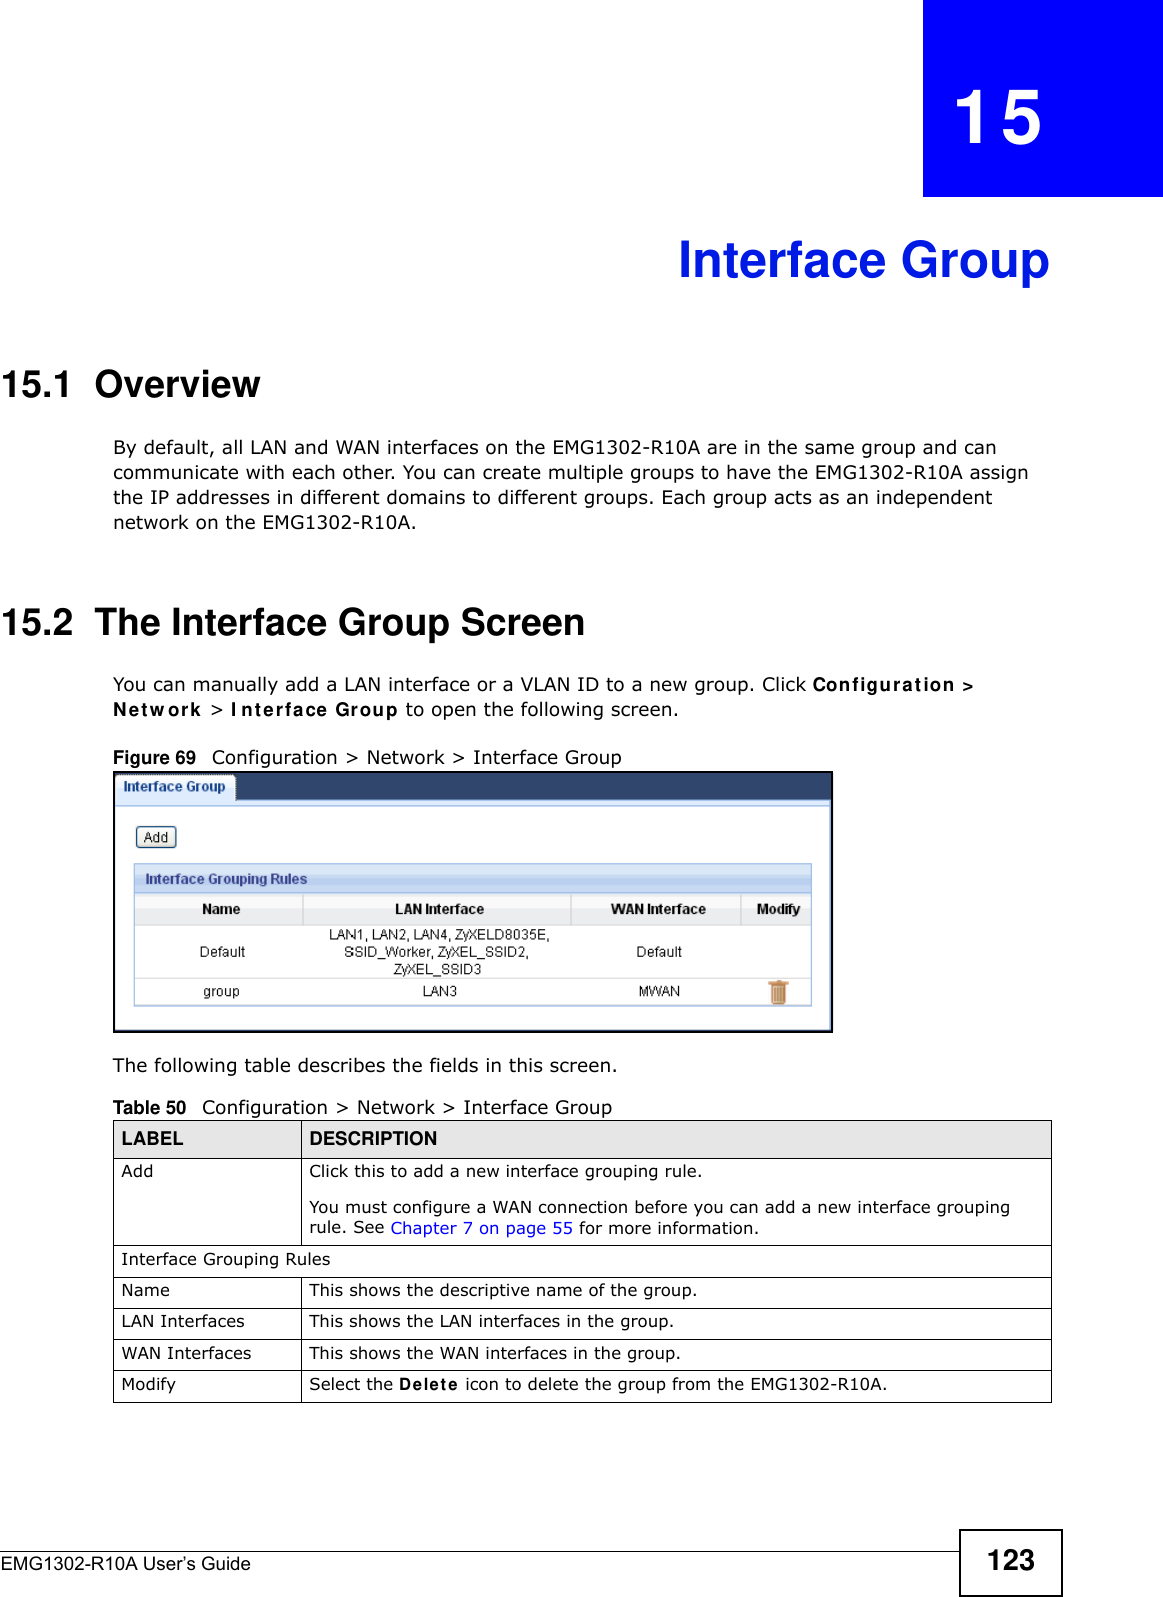 EMG1302-R10A User’s Guide 123CHAPTER   15Interface Group15.1  OverviewBy default, all LAN and WAN interfaces on the EMG1302-R10A are in the same group and can communicate with each other. You can create multiple groups to have the EMG1302-R10A assign the IP addresses in different domains to different groups. Each group acts as an independent network on the EMG1302-R10A. 15.2  The Interface Group ScreenYou can manually add a LAN interface or a VLAN ID to a new group. Click Configurat ion &gt;  N e t w ork &gt; I nte r fa ce Group to open the following screen. Figure 69   Configuration &gt; Network &gt; Interface Group The following table describes the fields in this screen. Table 50   Configuration &gt; Network &gt; Interface GroupLABEL DESCRIPTIONAdd  Click this to add a new interface grouping rule. You must configure a WAN connection before you can add a new interface grouping rule. See Chapter 7 on page 55 for more information. Interface Grouping RulesName This shows the descriptive name of the group.LAN Interfaces This shows the LAN interfaces in the group.WAN Interfaces This shows the WAN interfaces in the group.Modify Select the D e let e  icon to delete the group from the EMG1302-R10A.